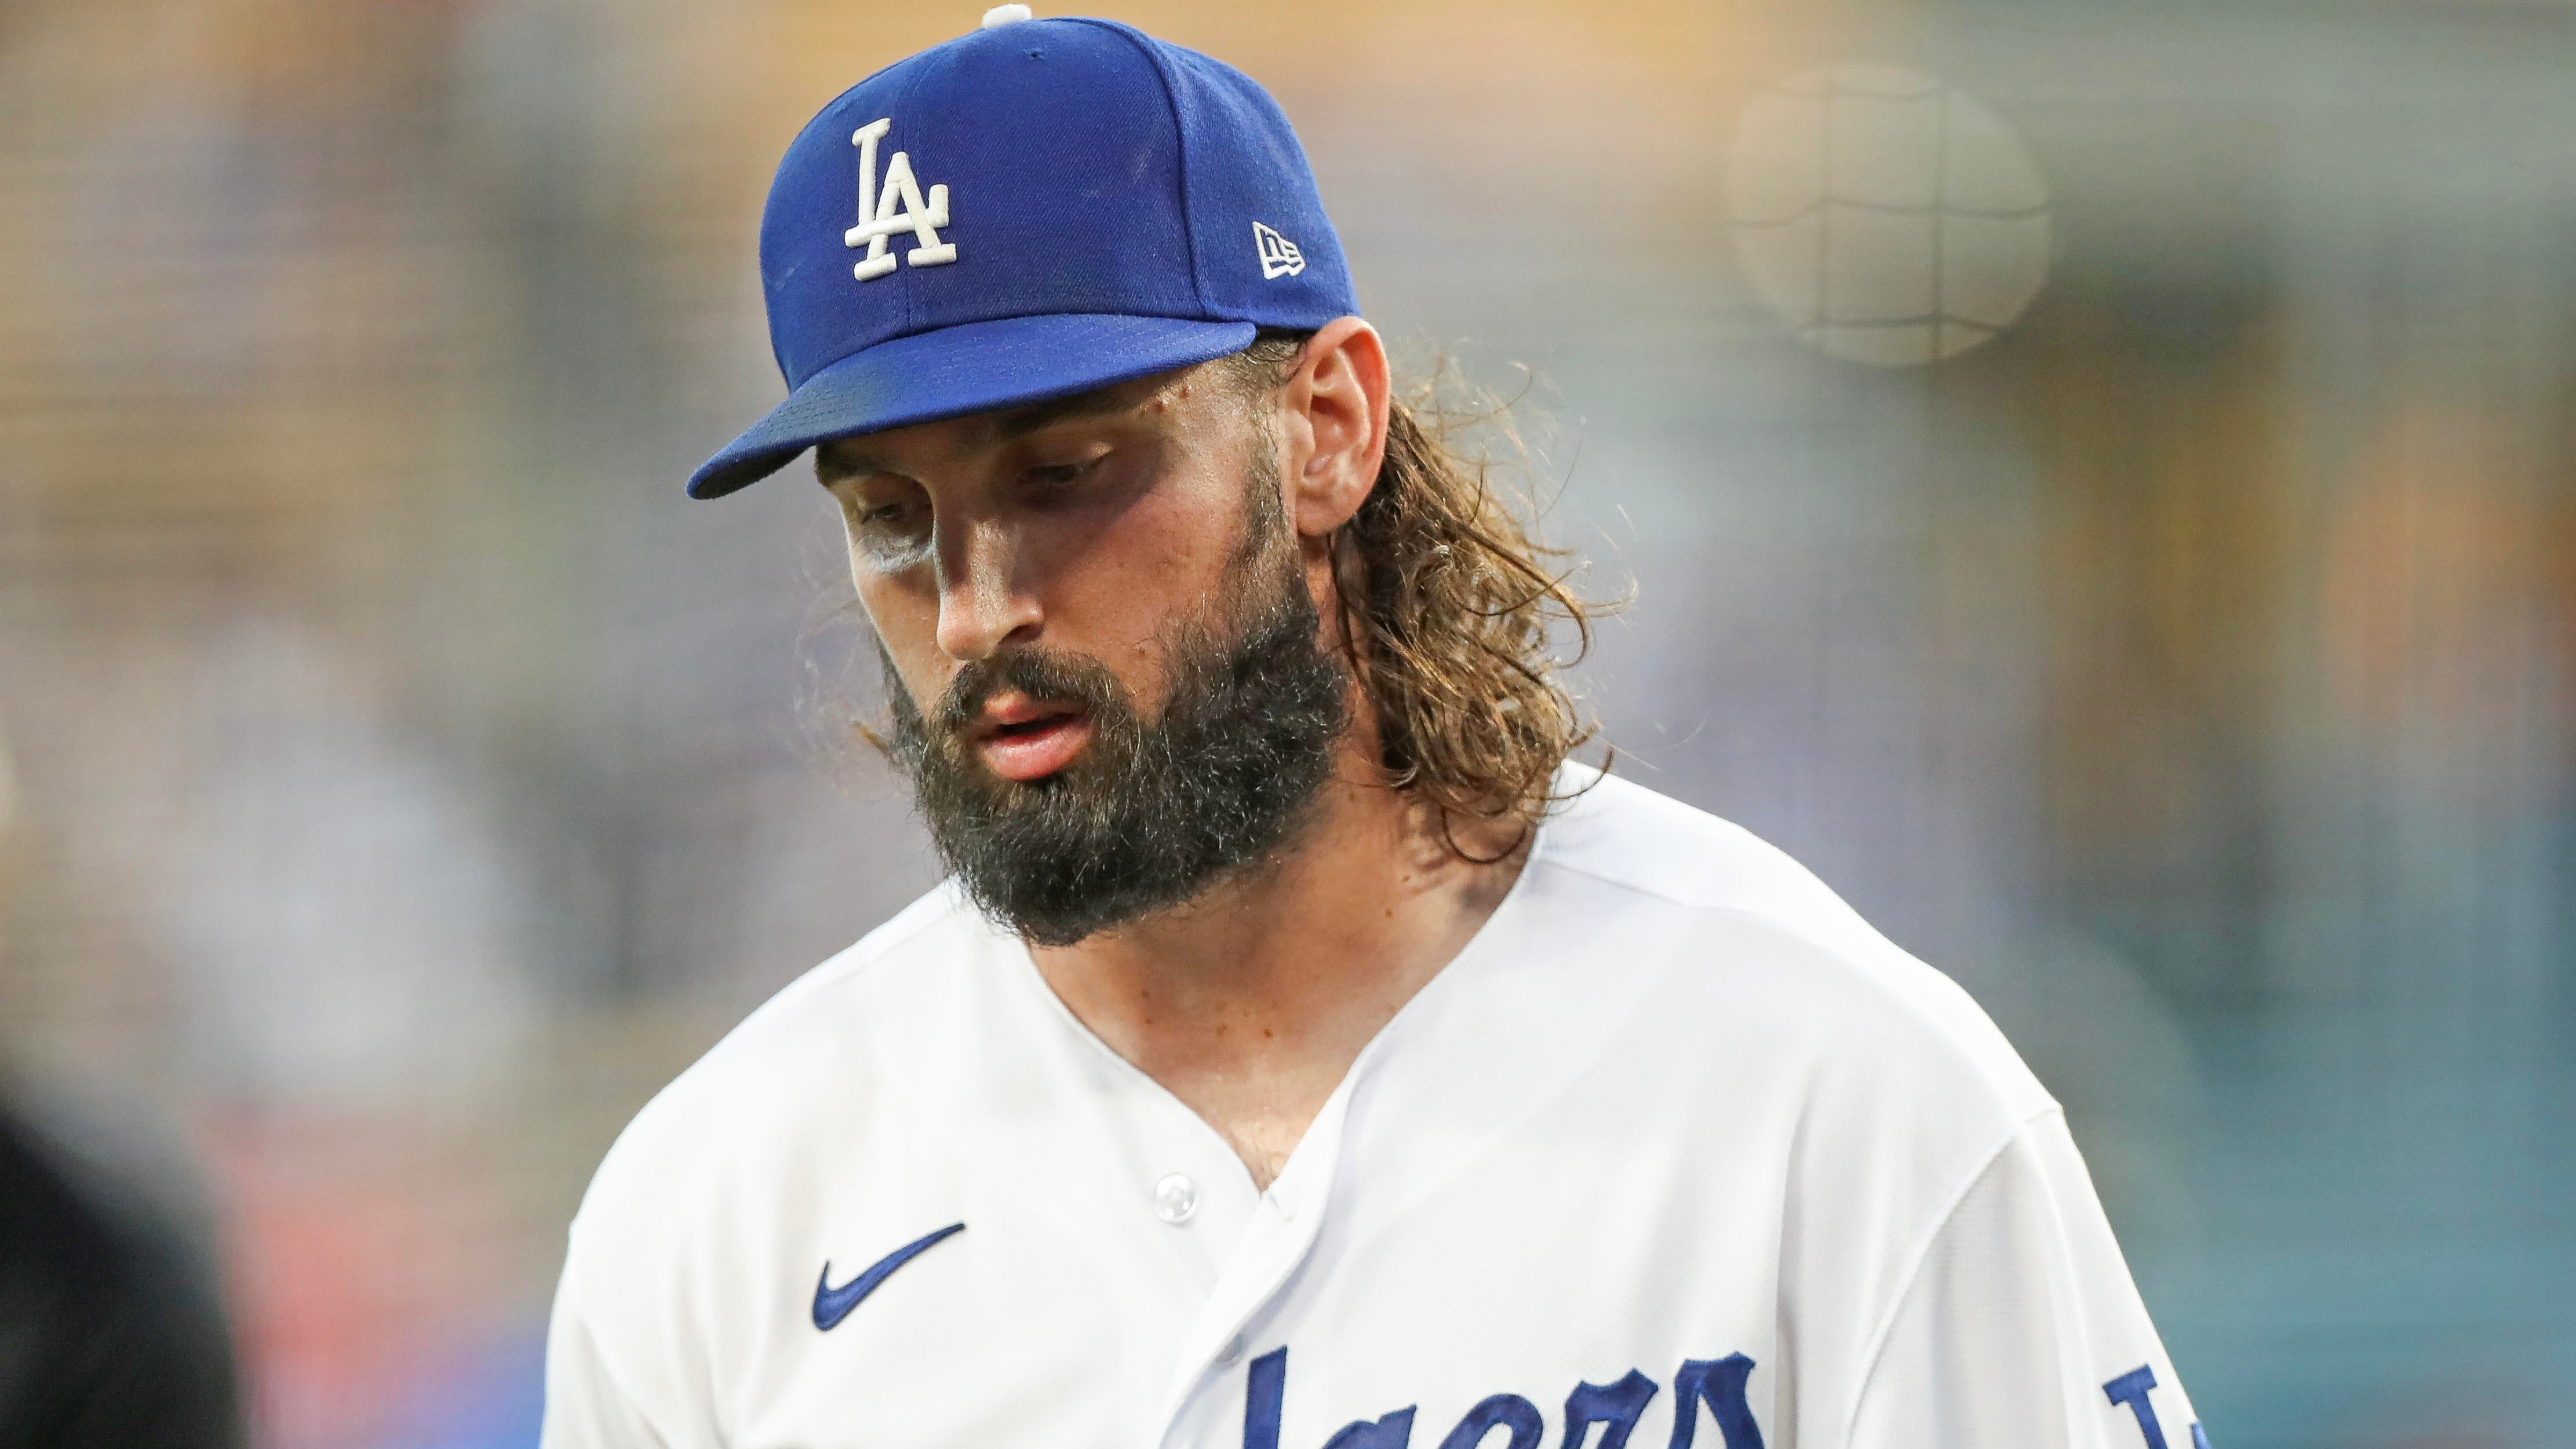 Tony Gonsolin injury update: Dodgers right-hander to undergo Tommy John surgery, per report